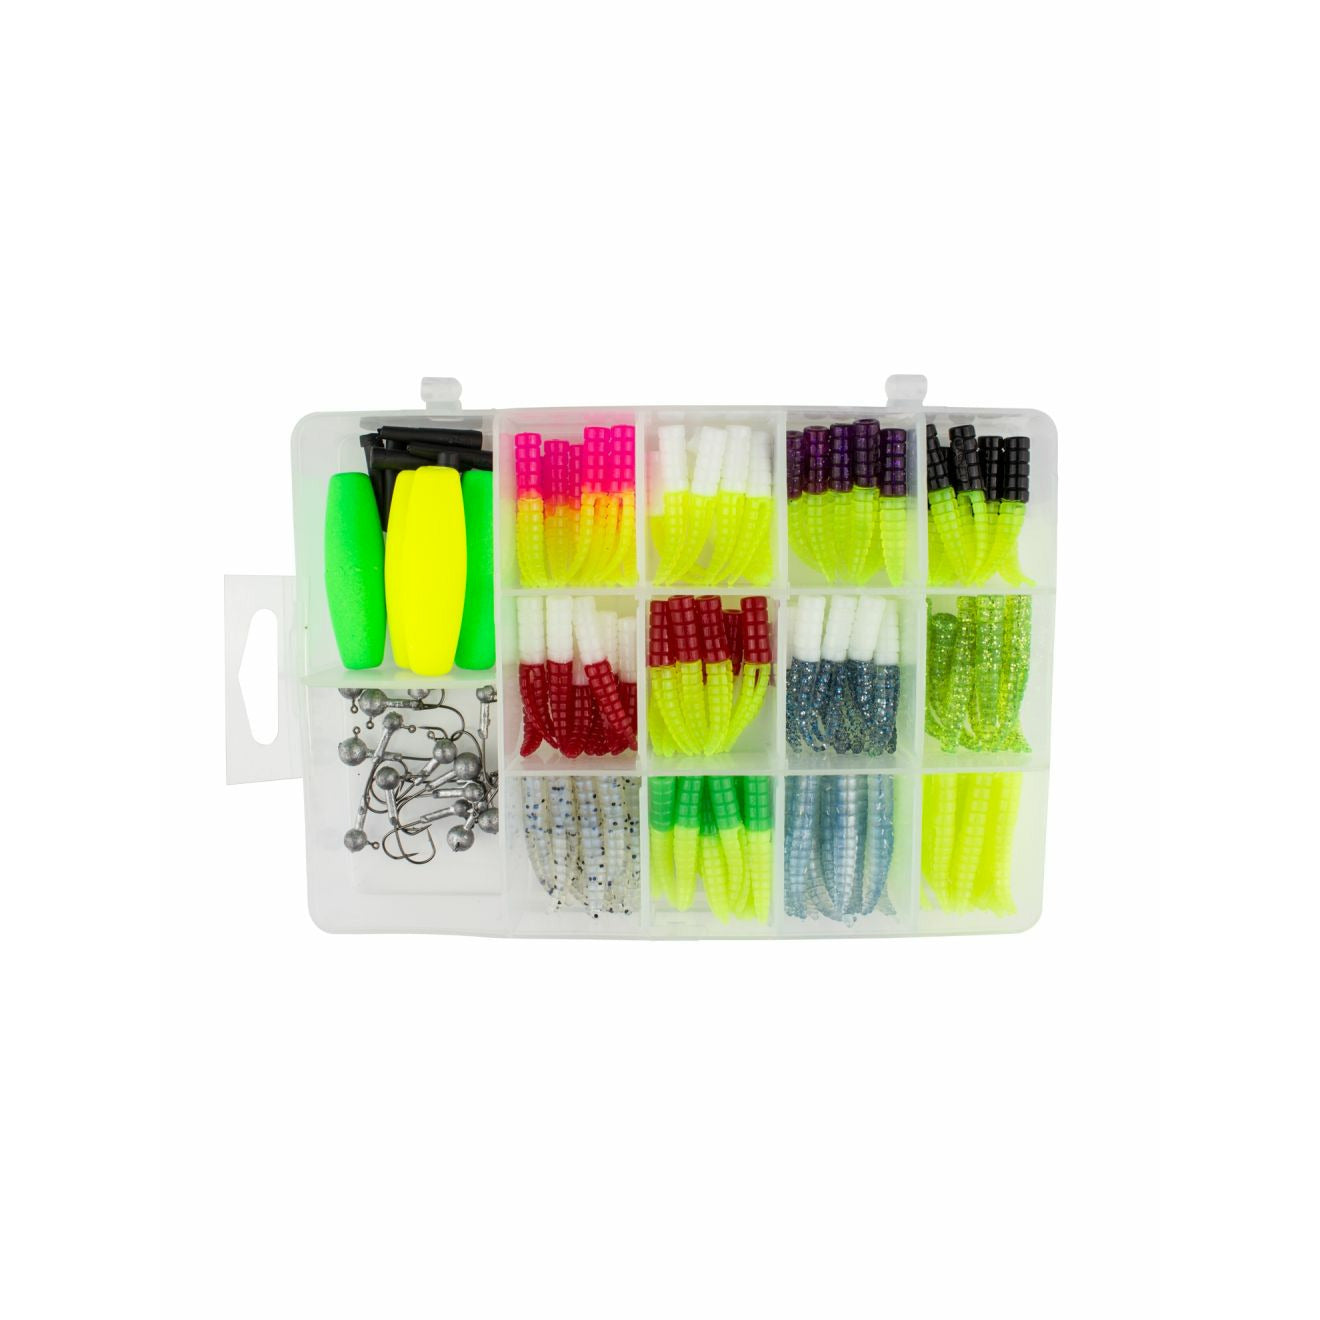 LELAND LURES CRAPPIE MAGNET BEST OF THE BEST KIT - 0